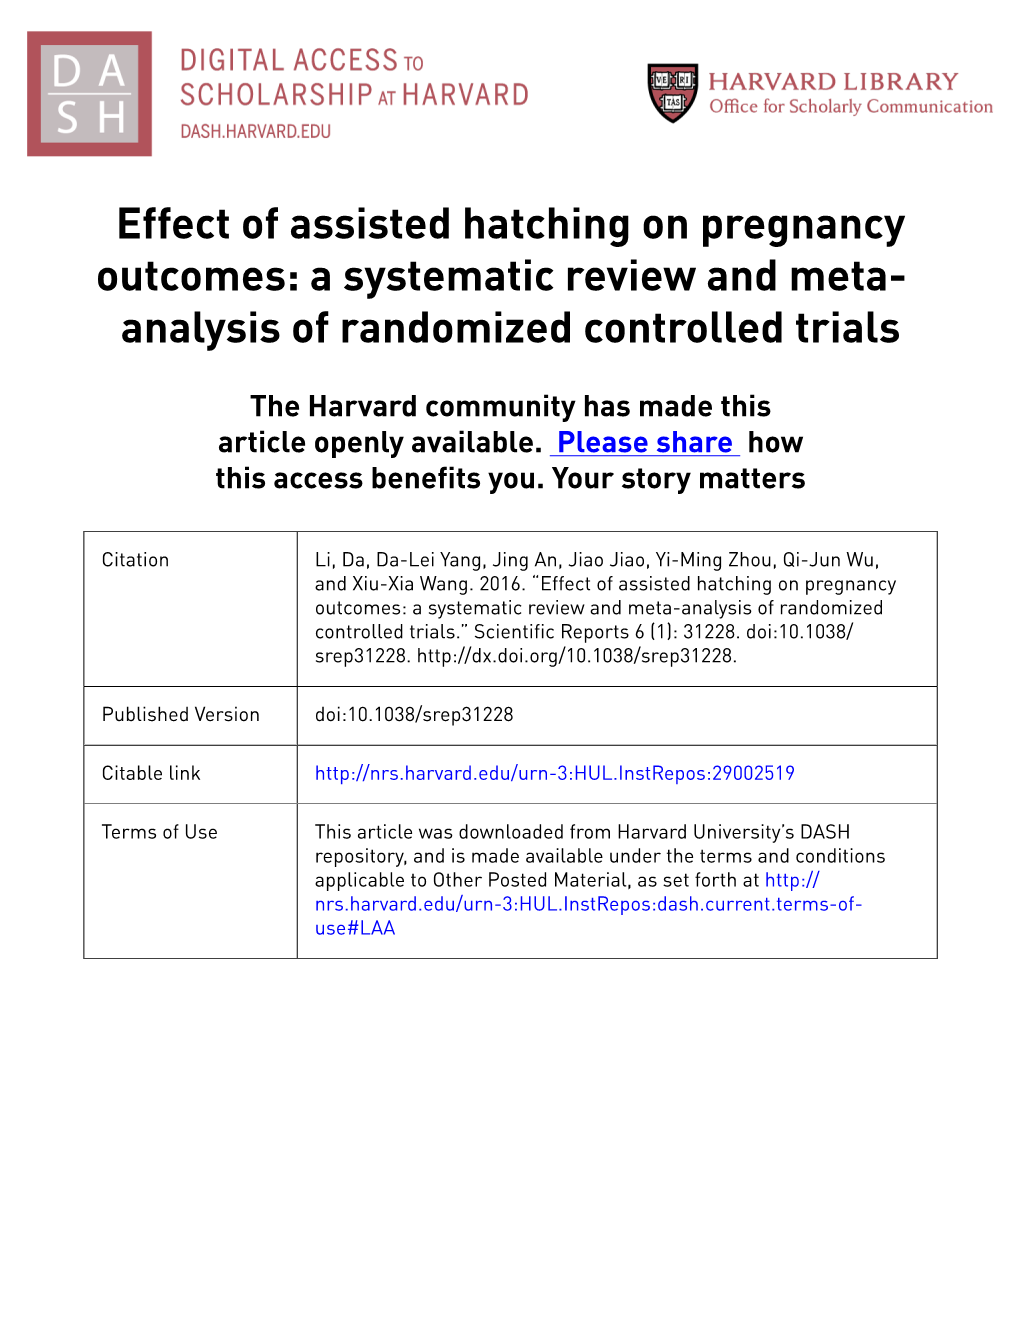 Effect of Assisted Hatching on Pregnancy Outcomes: a Systematic Review and Meta- Analysis of Randomized Controlled Trials